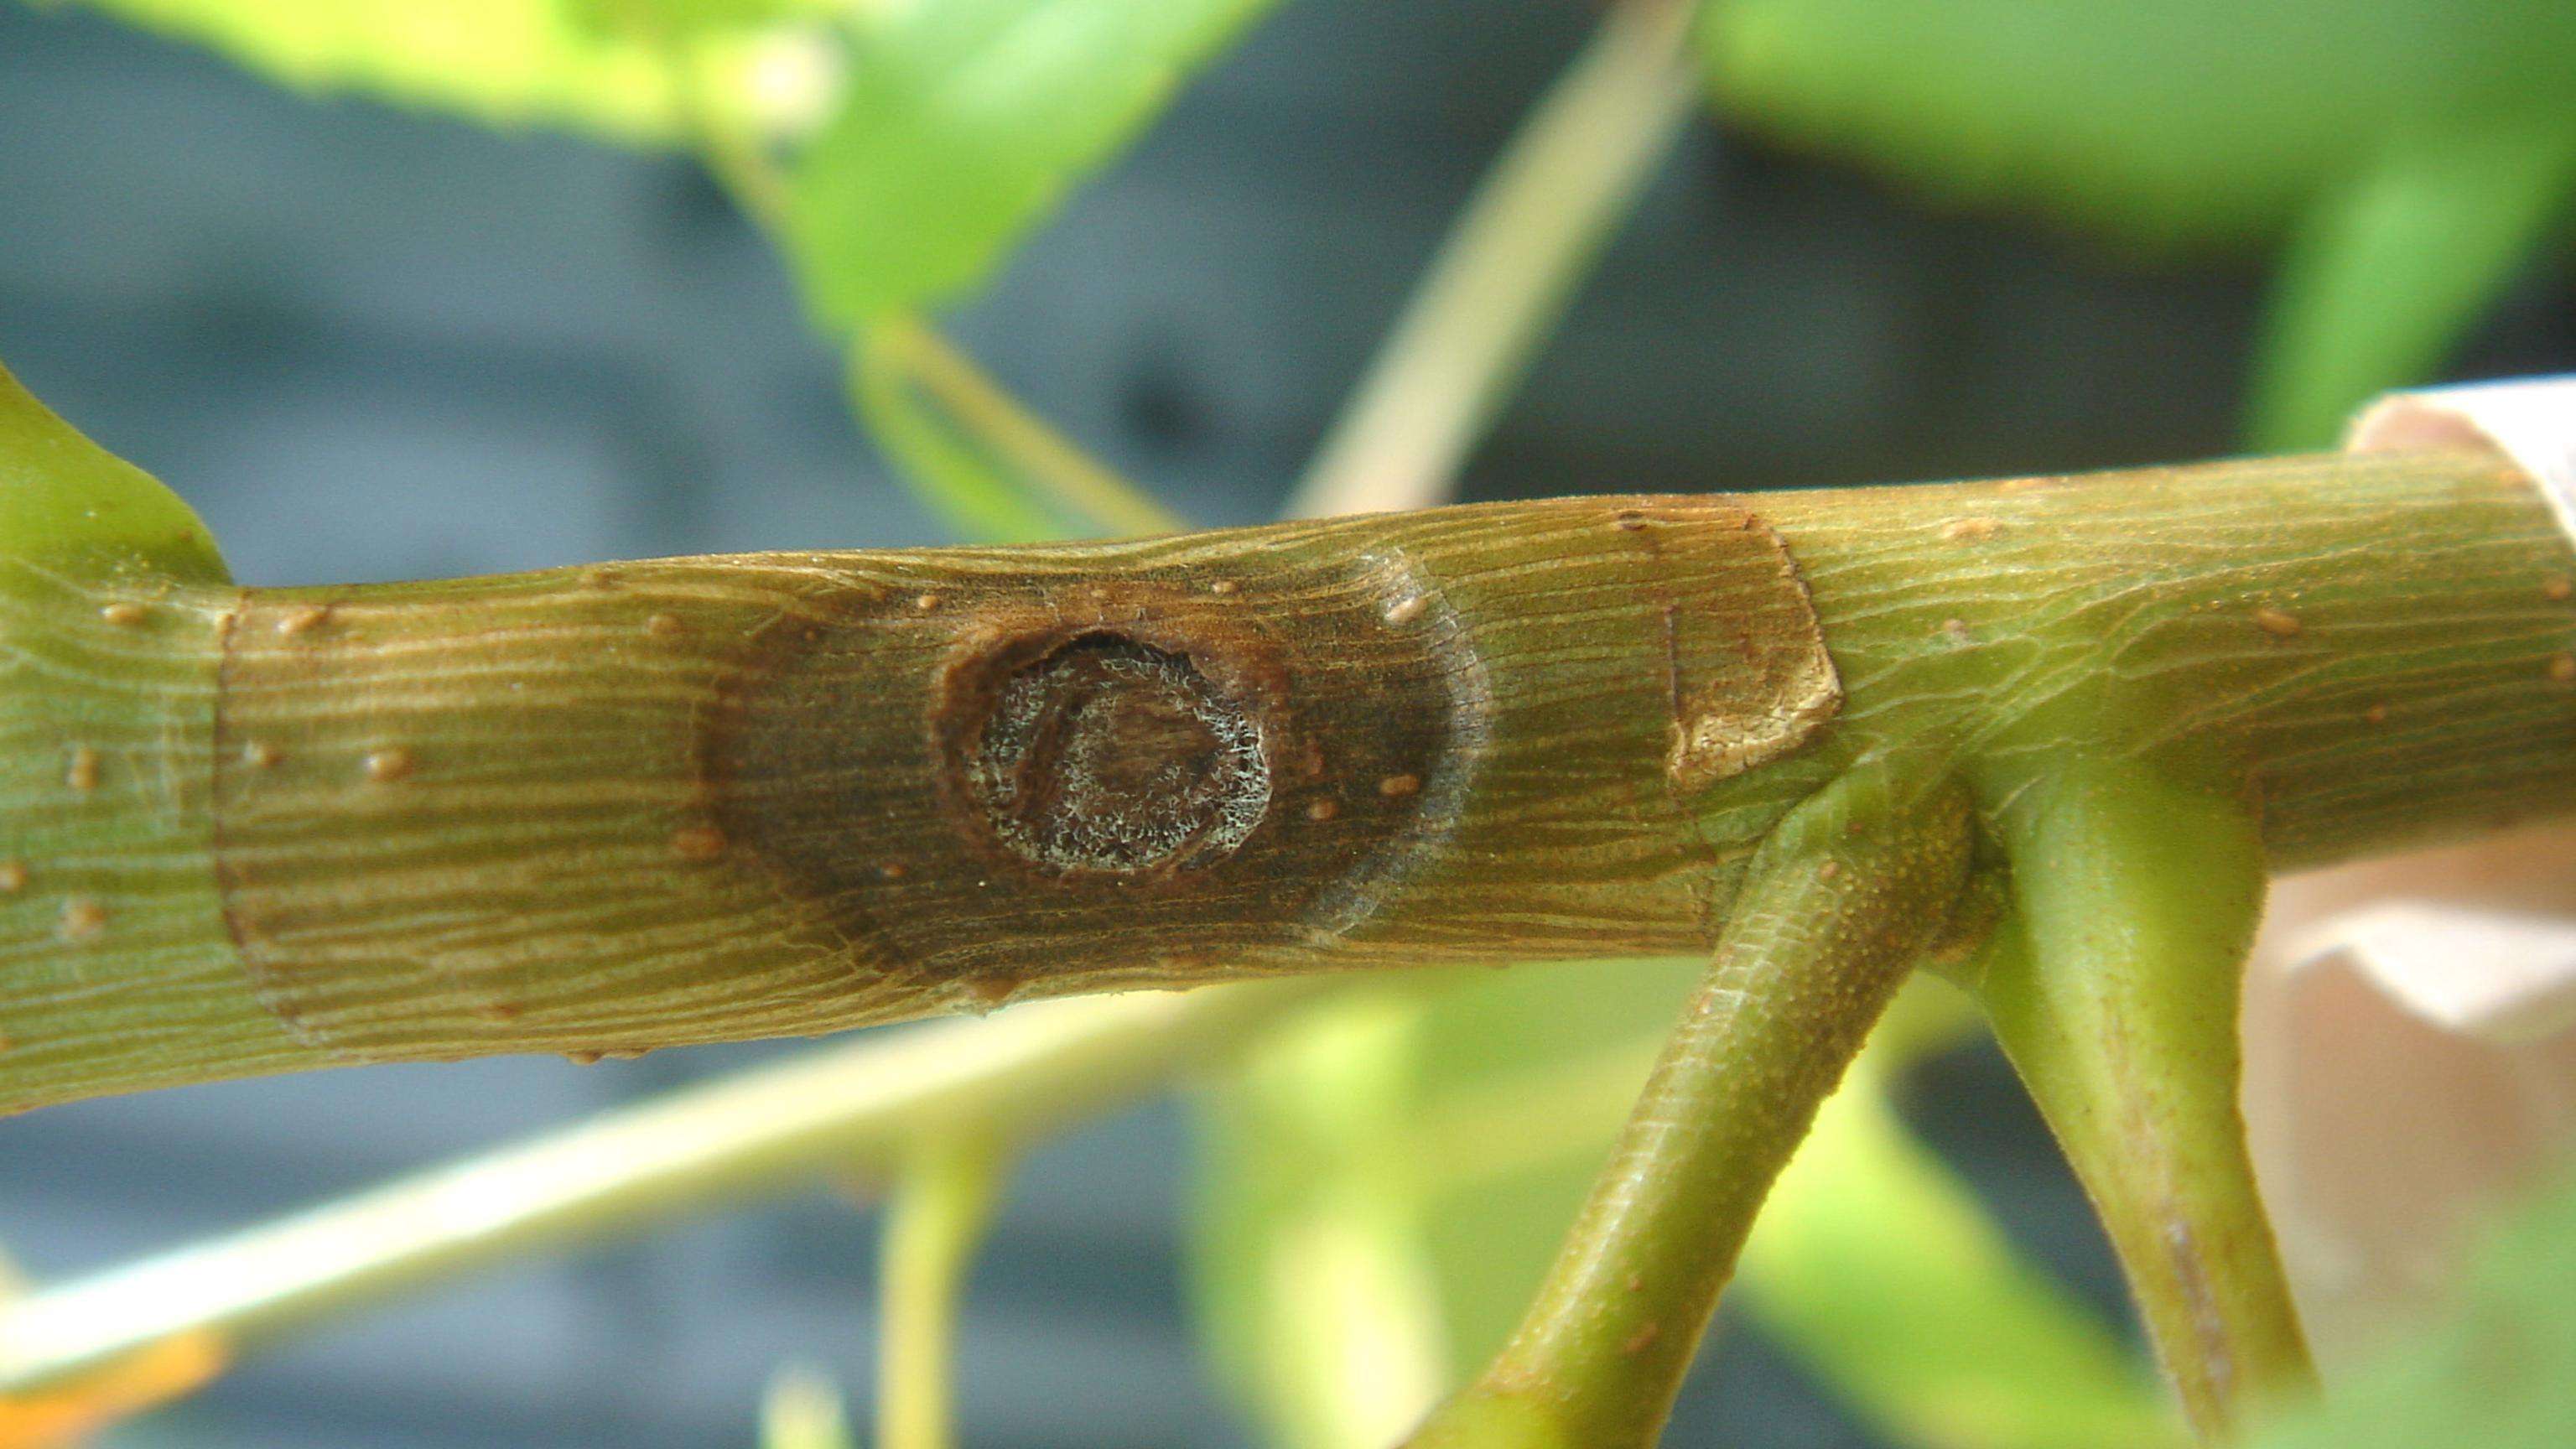 Canker on a Southern California walnut seedling; canker is circular and dark amber in color with fungus spores at the outer edges of the canker wound.